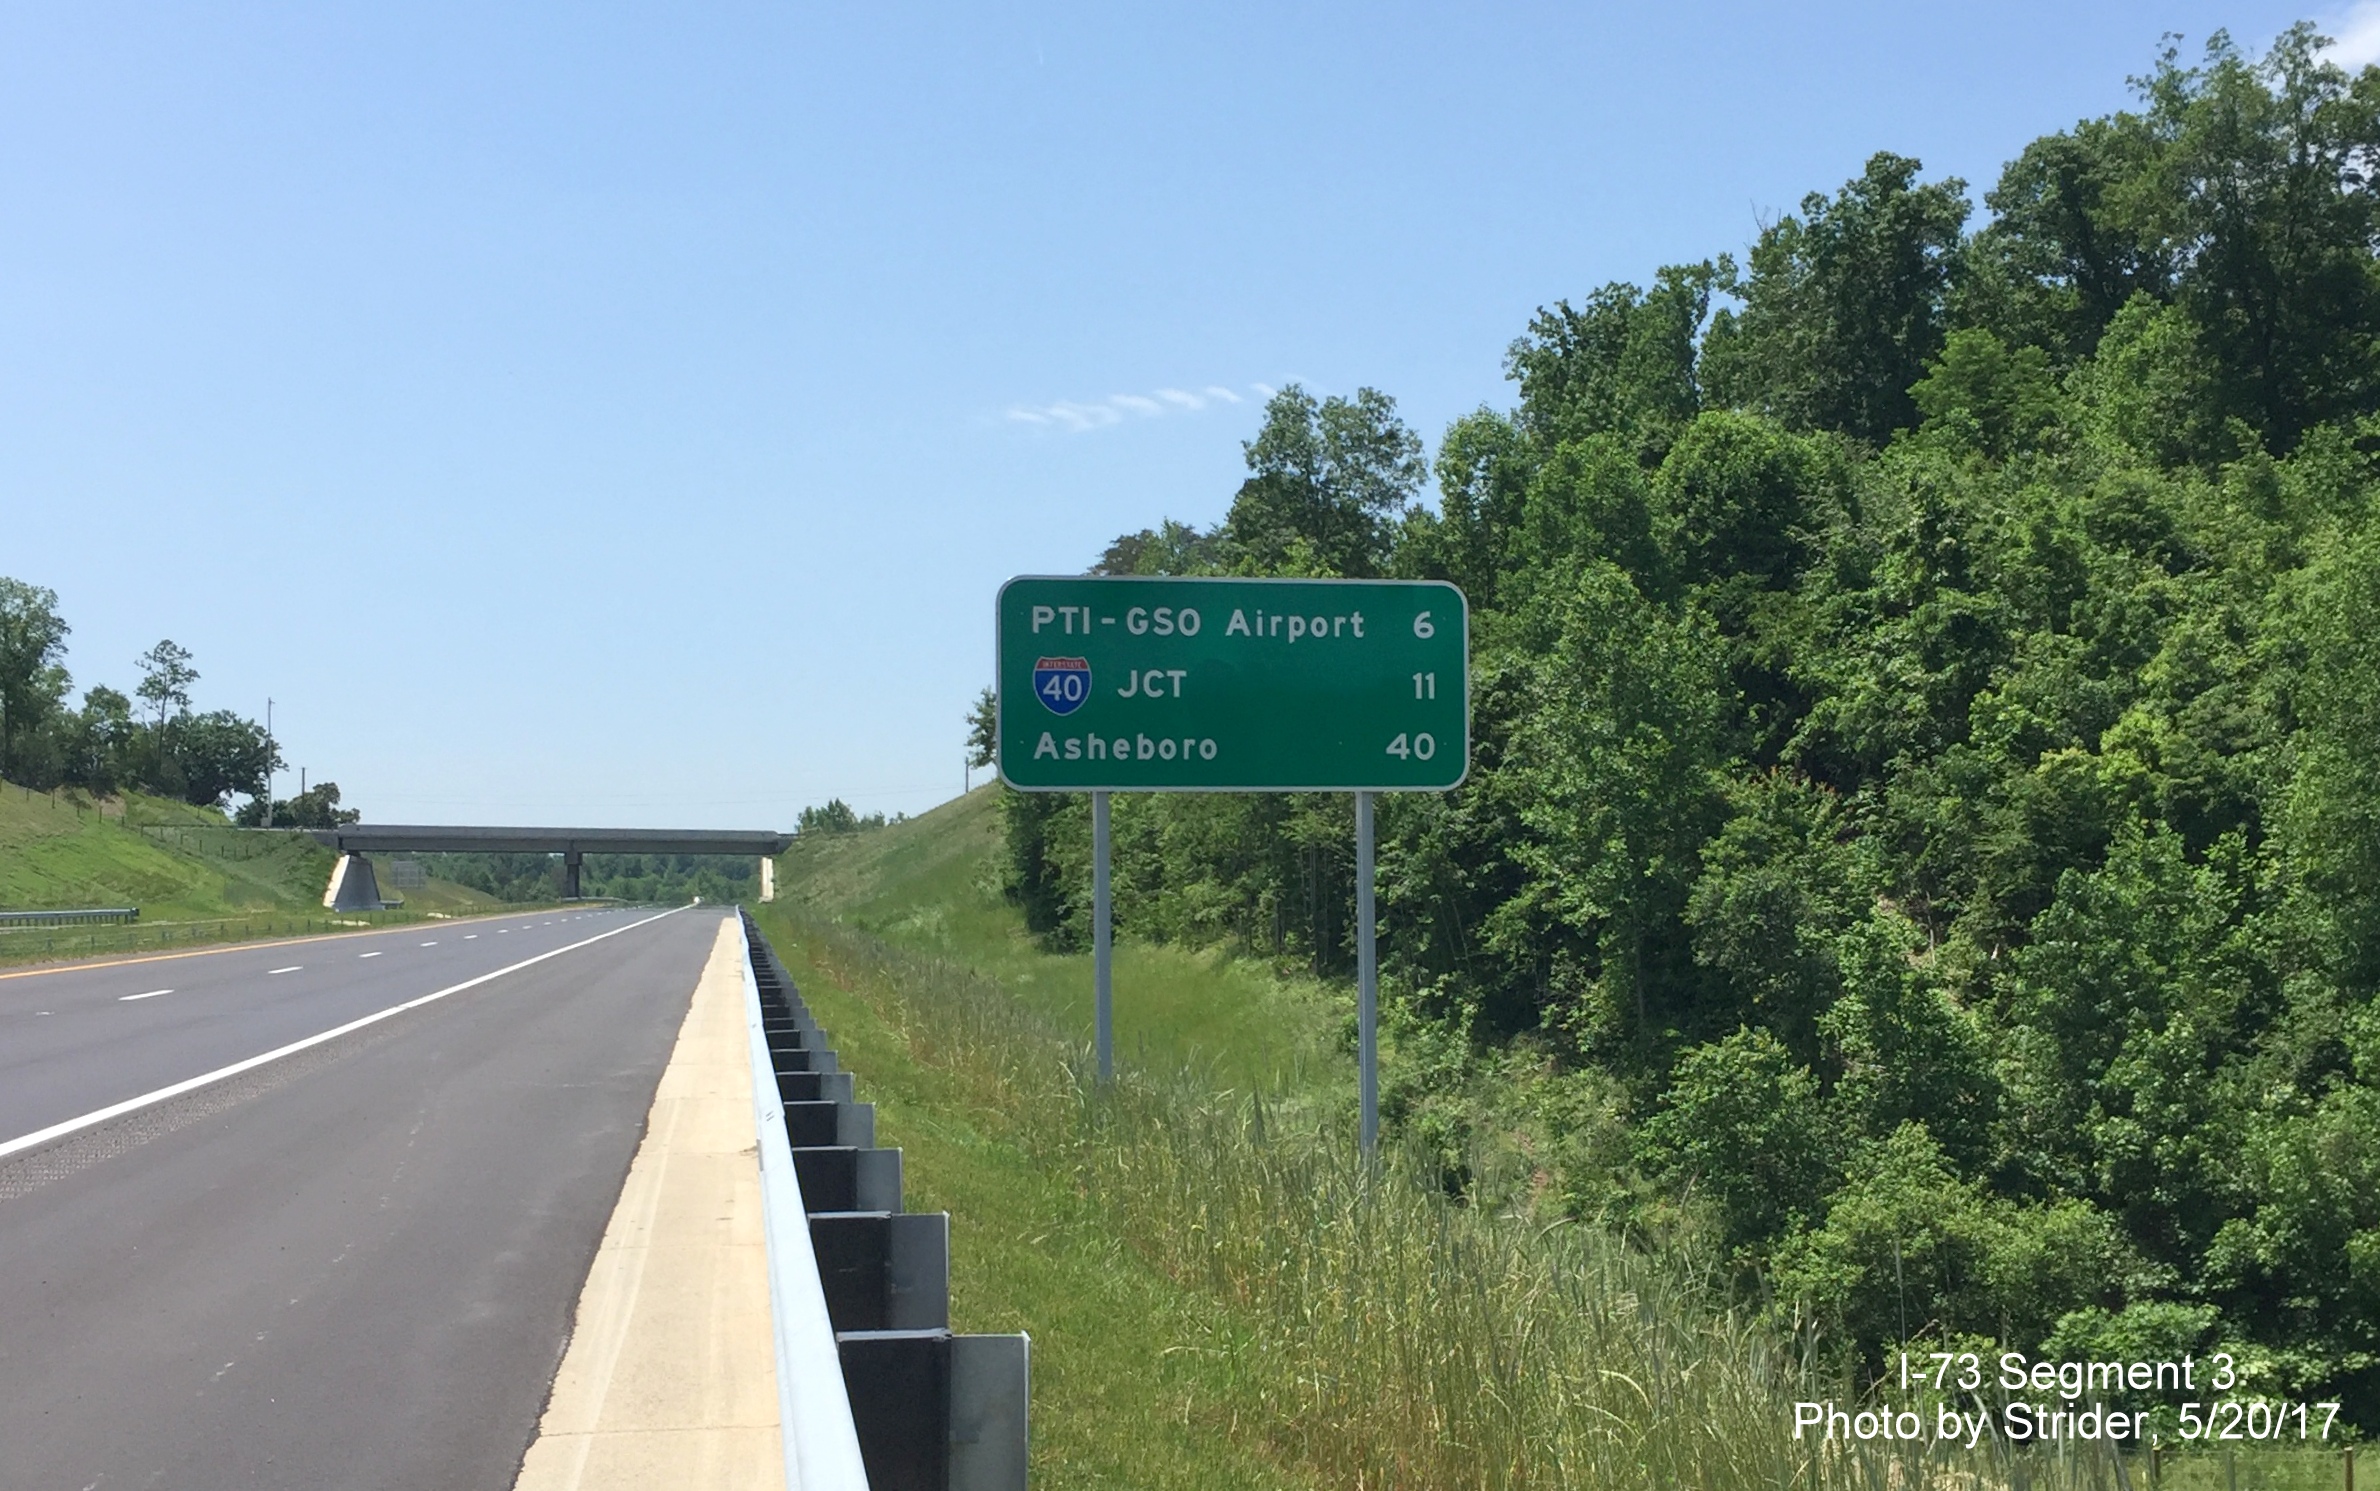 Image taken of destination mileage sign on new I-73 South highway north of Greensboro, by Strider